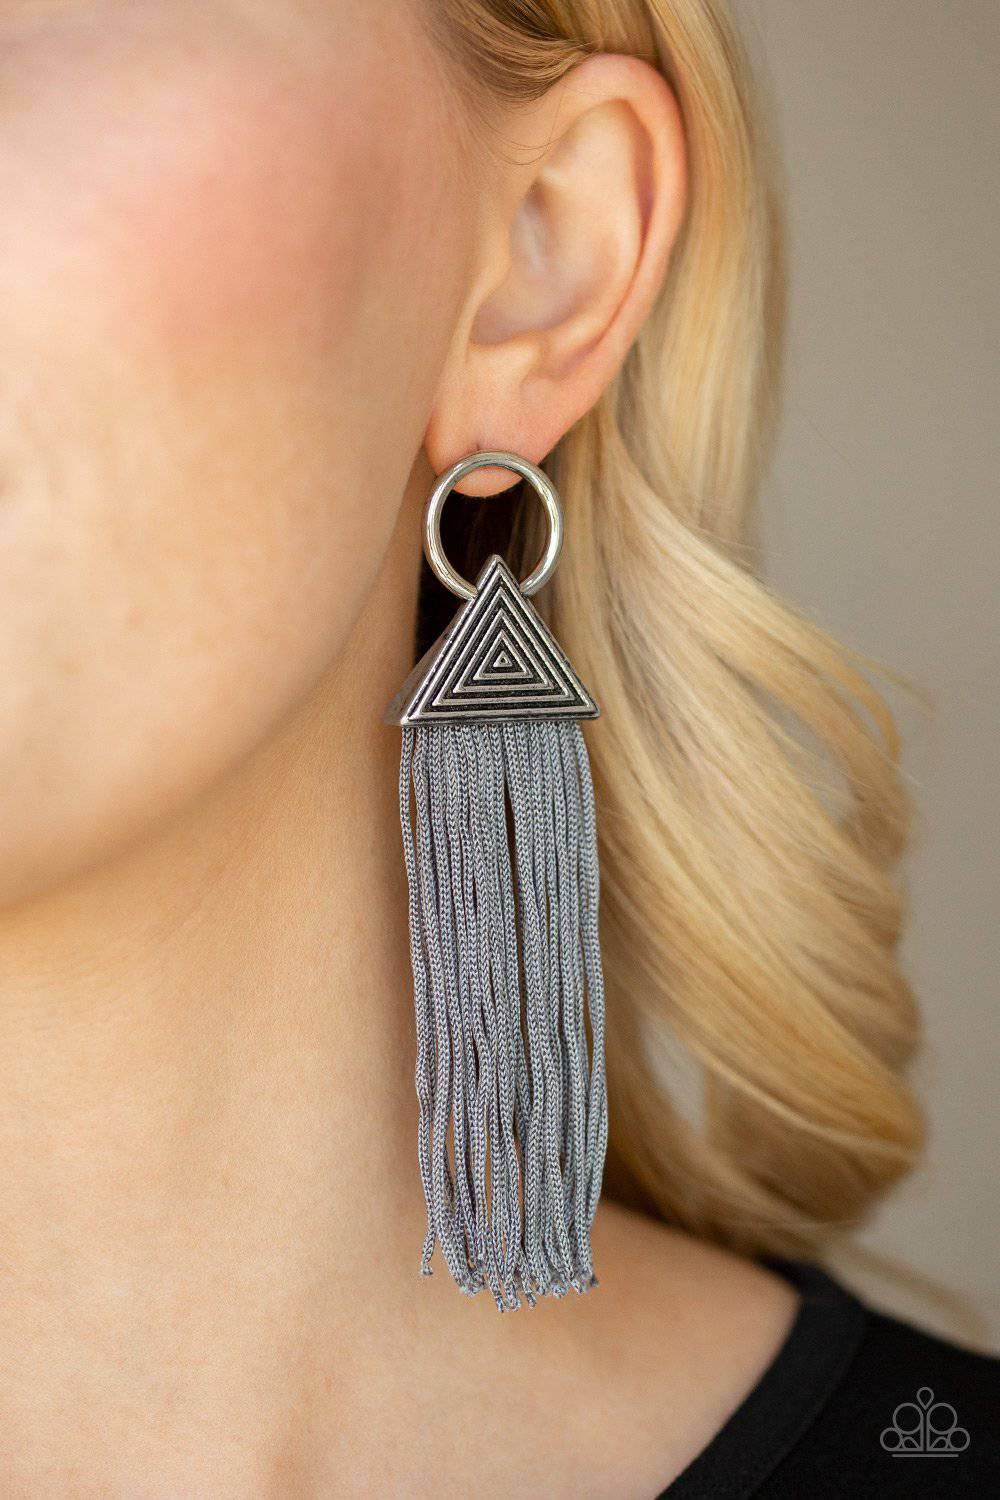 D179 - Oh My Giza Black Earrings by Paparazzi Accessories on Fancy5Fashion.com